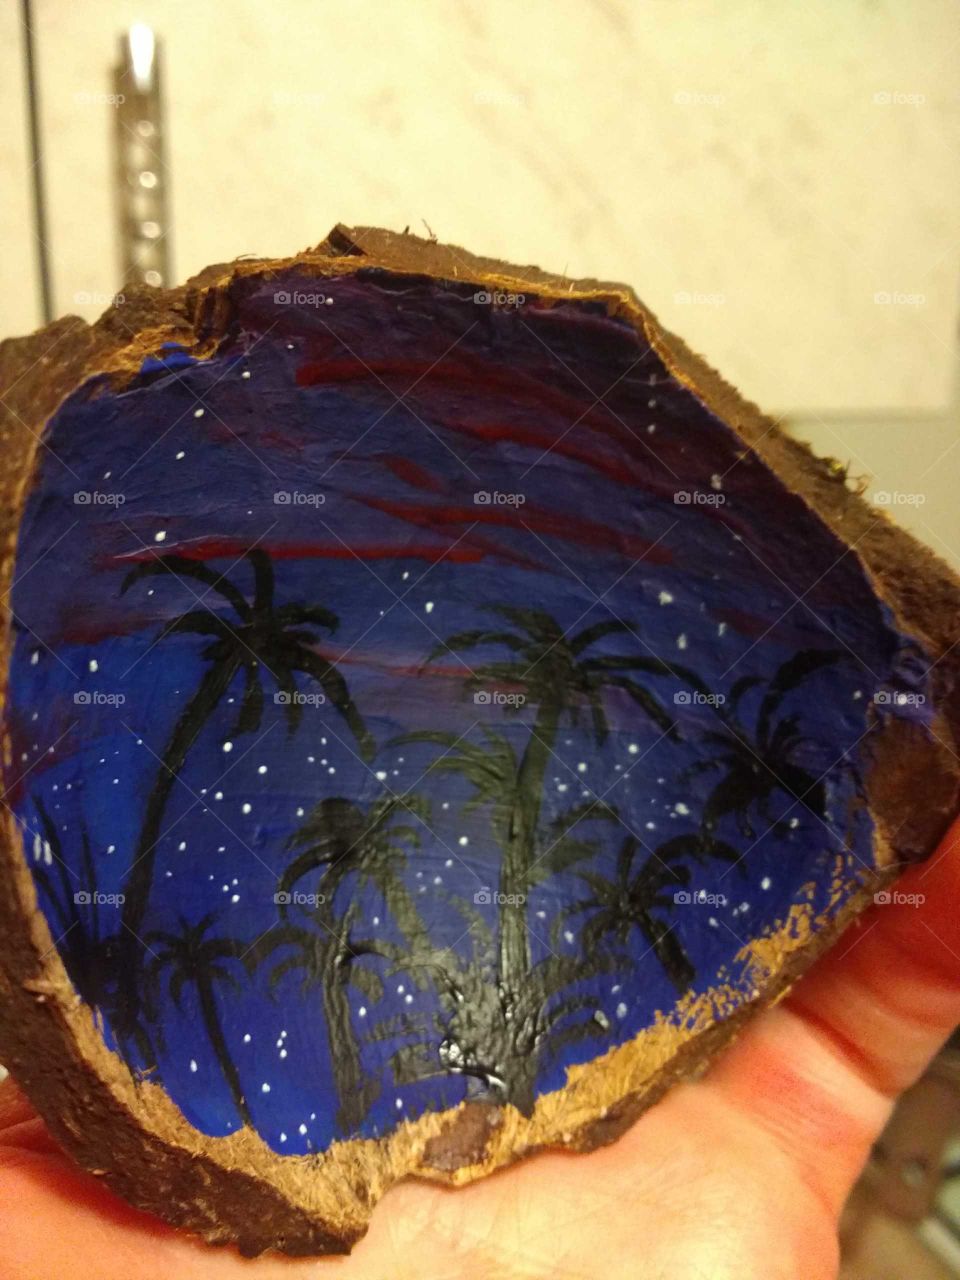 The other life of the coconut